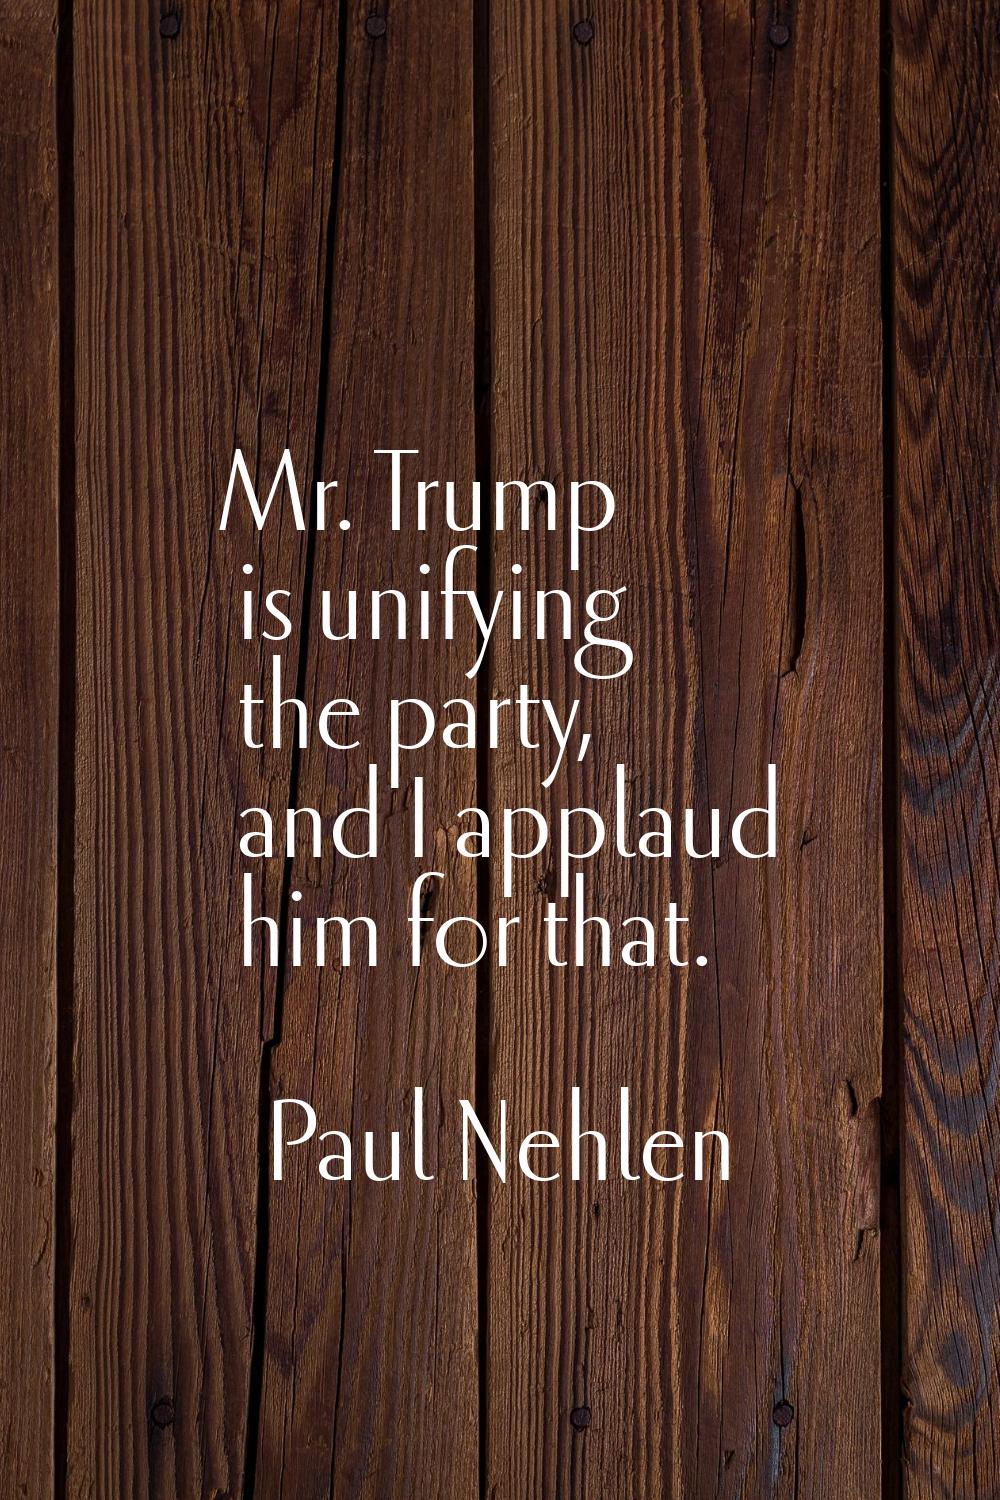 Mr. Trump is unifying the party, and I applaud him for that.